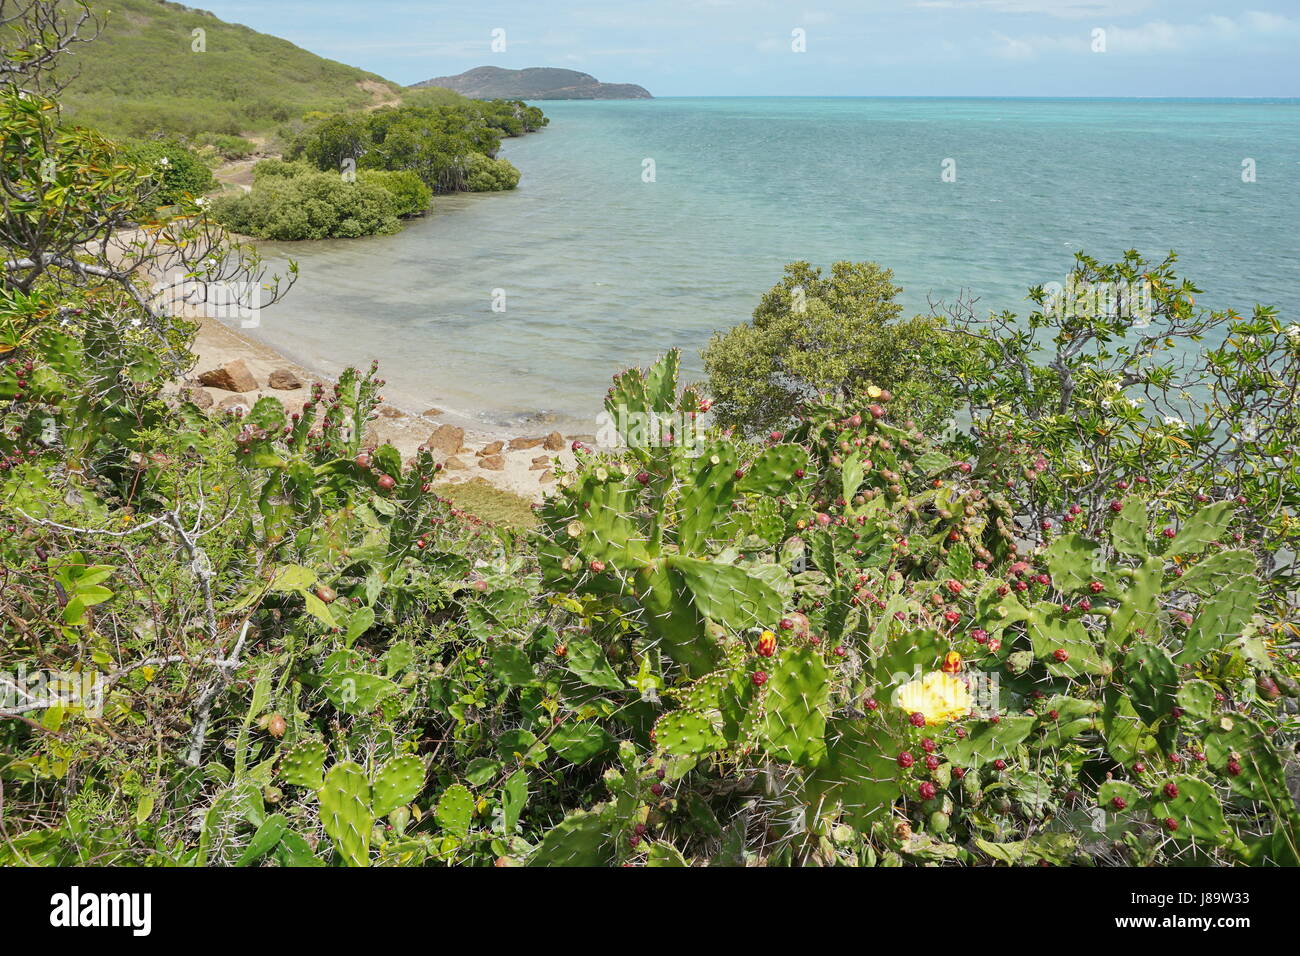 Seascape on the lagoon with Opuntia cactus in foreground on the West coast of Grande Terre island near La Foa, New Caledonia, south Pacific ocean Stock Photo